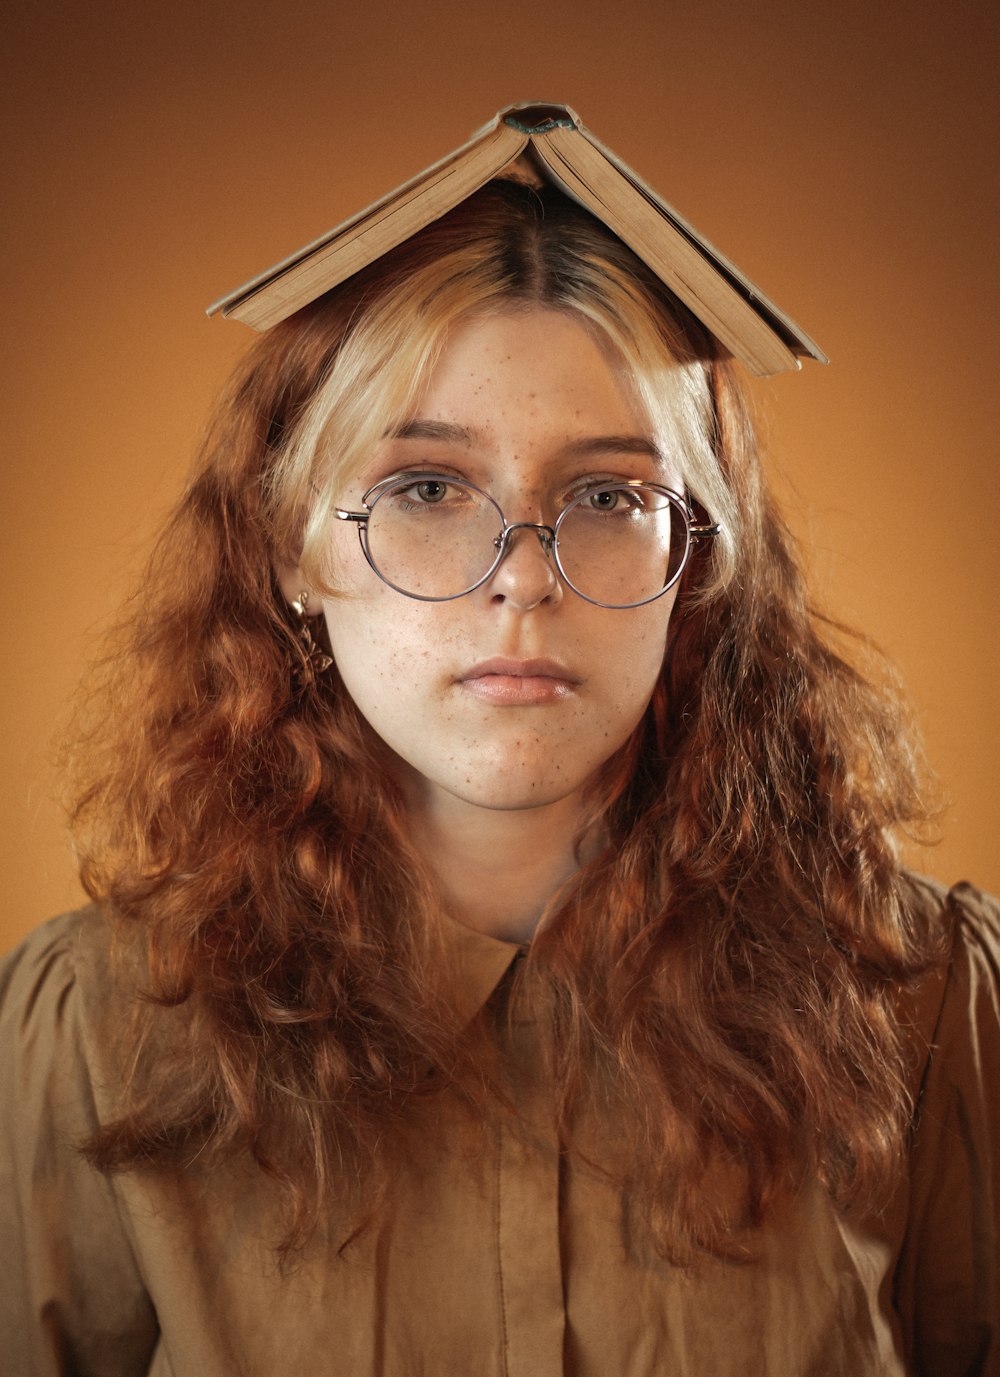 a woman with glasses and a book on her head